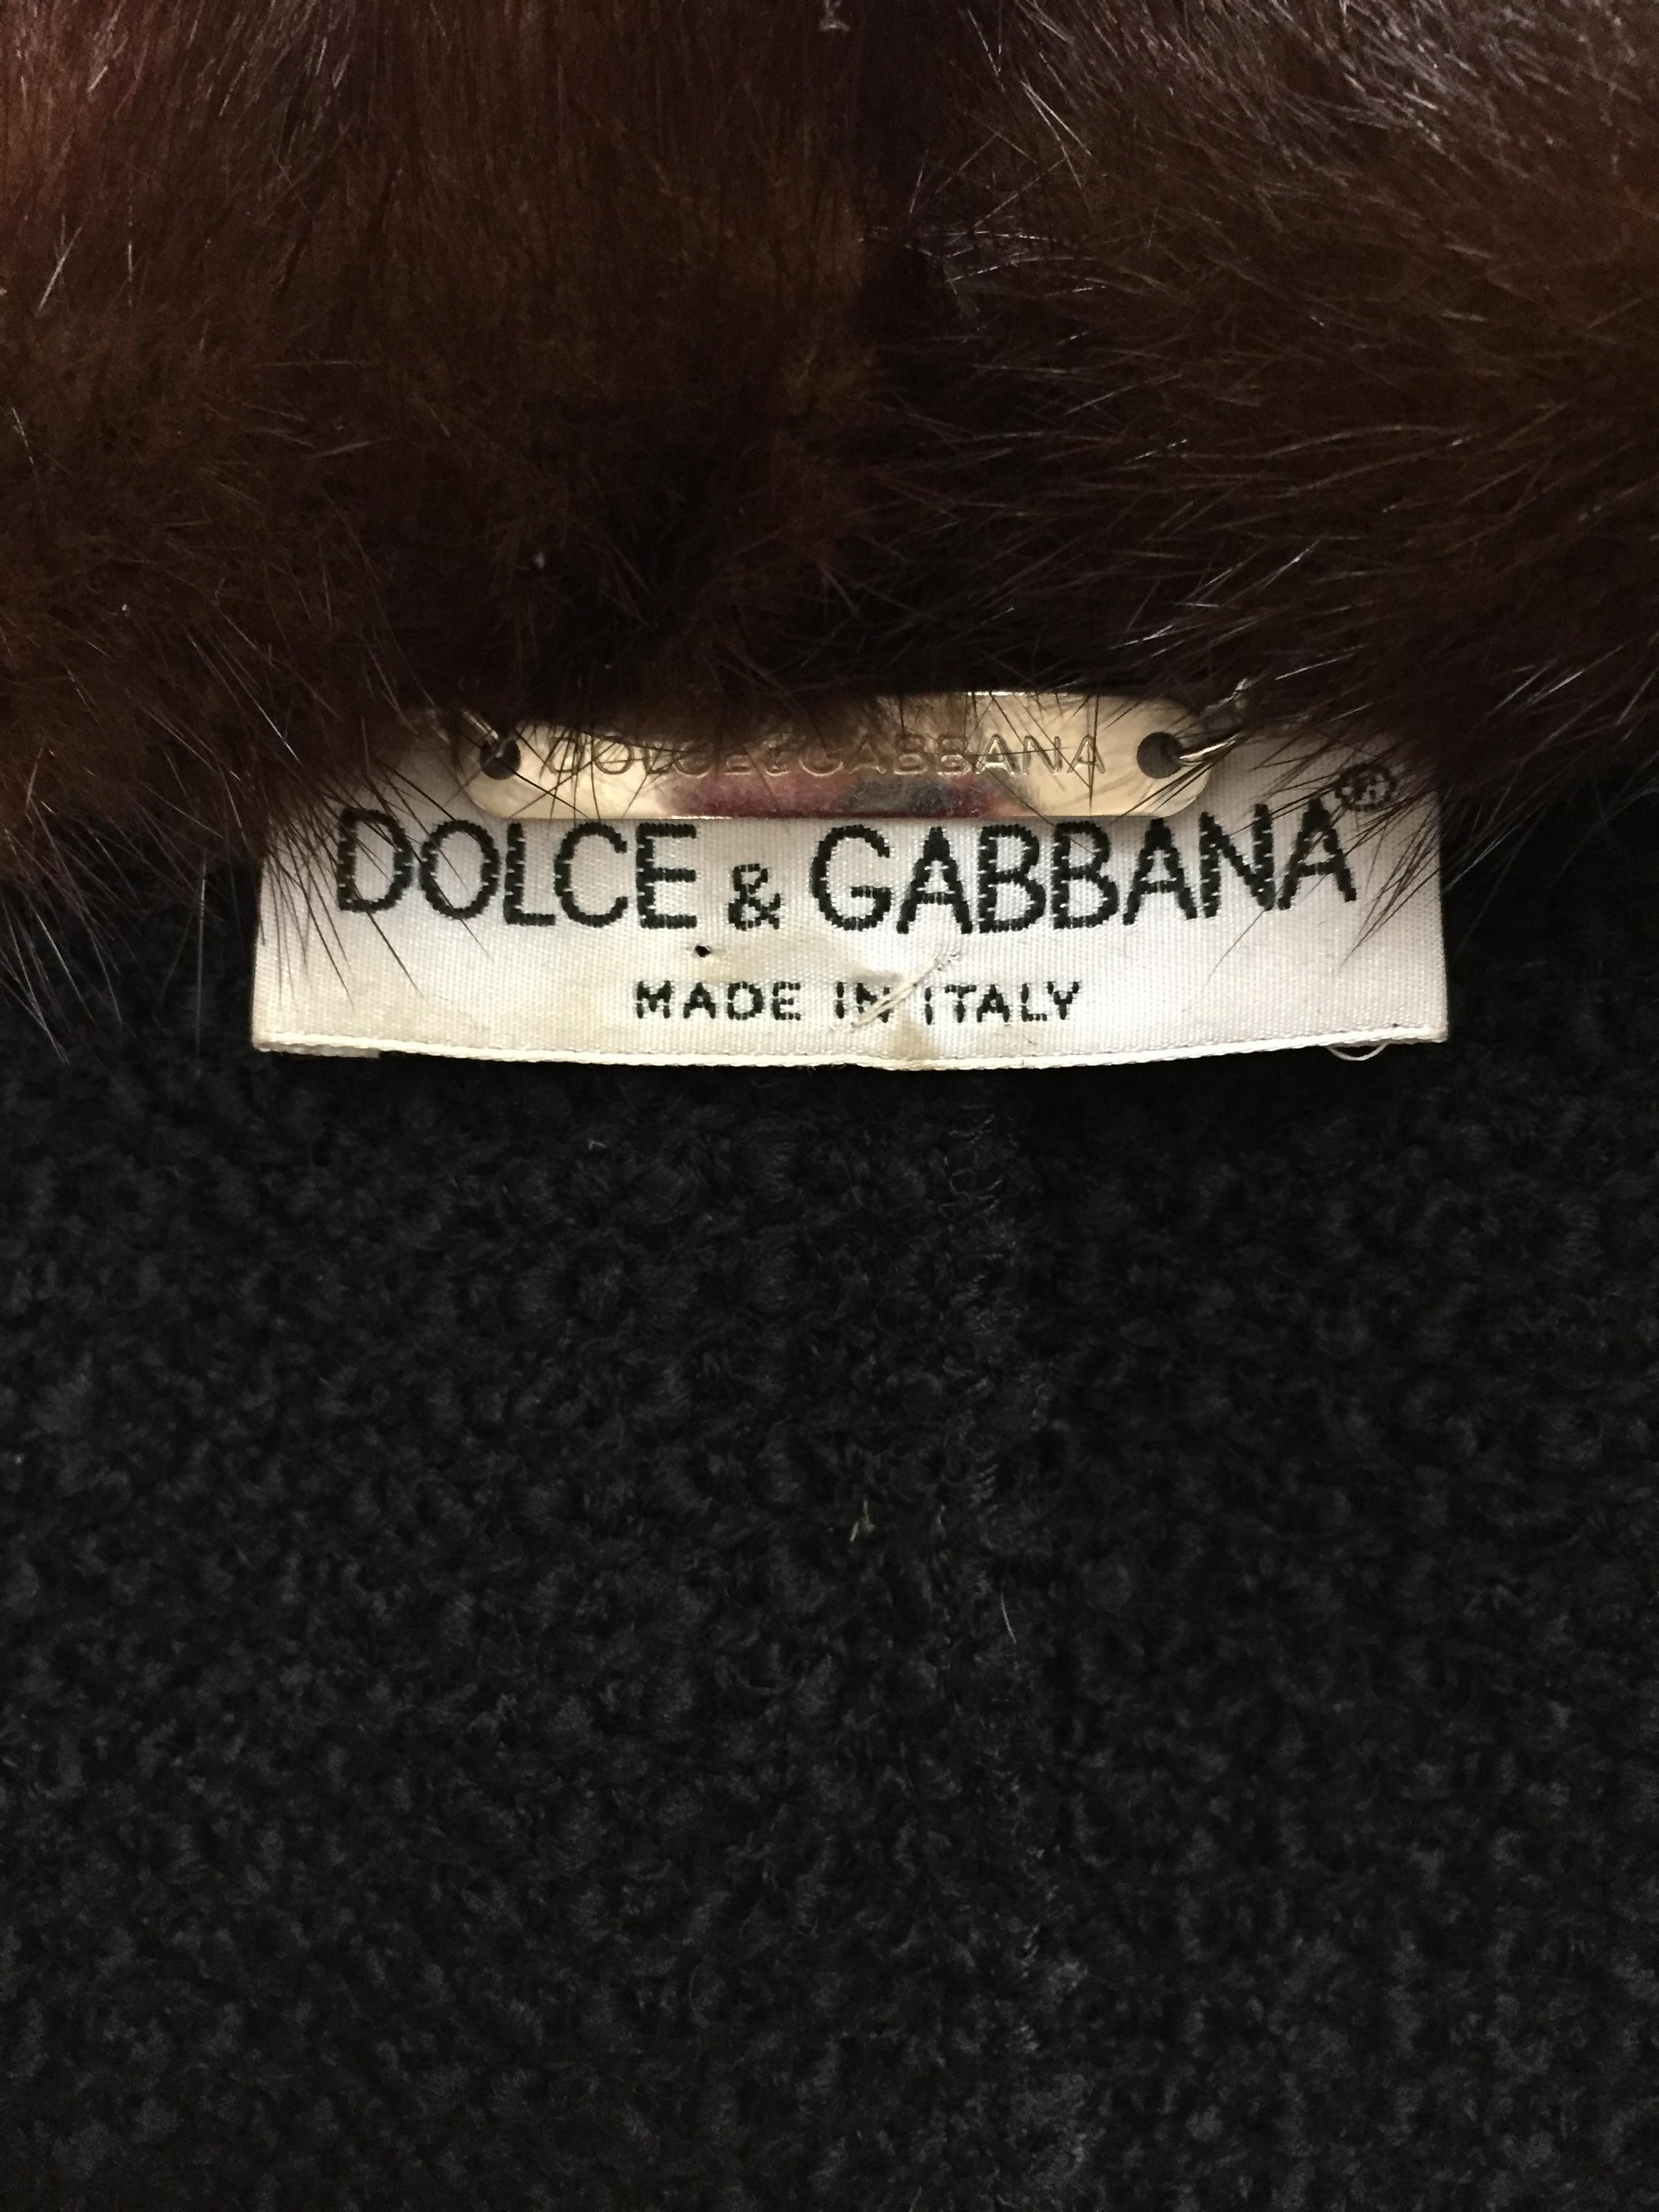 S/S 1997 Dolce & Gabbana Pin-Up Black Knit Jacket & Skirt Set w Sable Fur In Good Condition In Yukon, OK